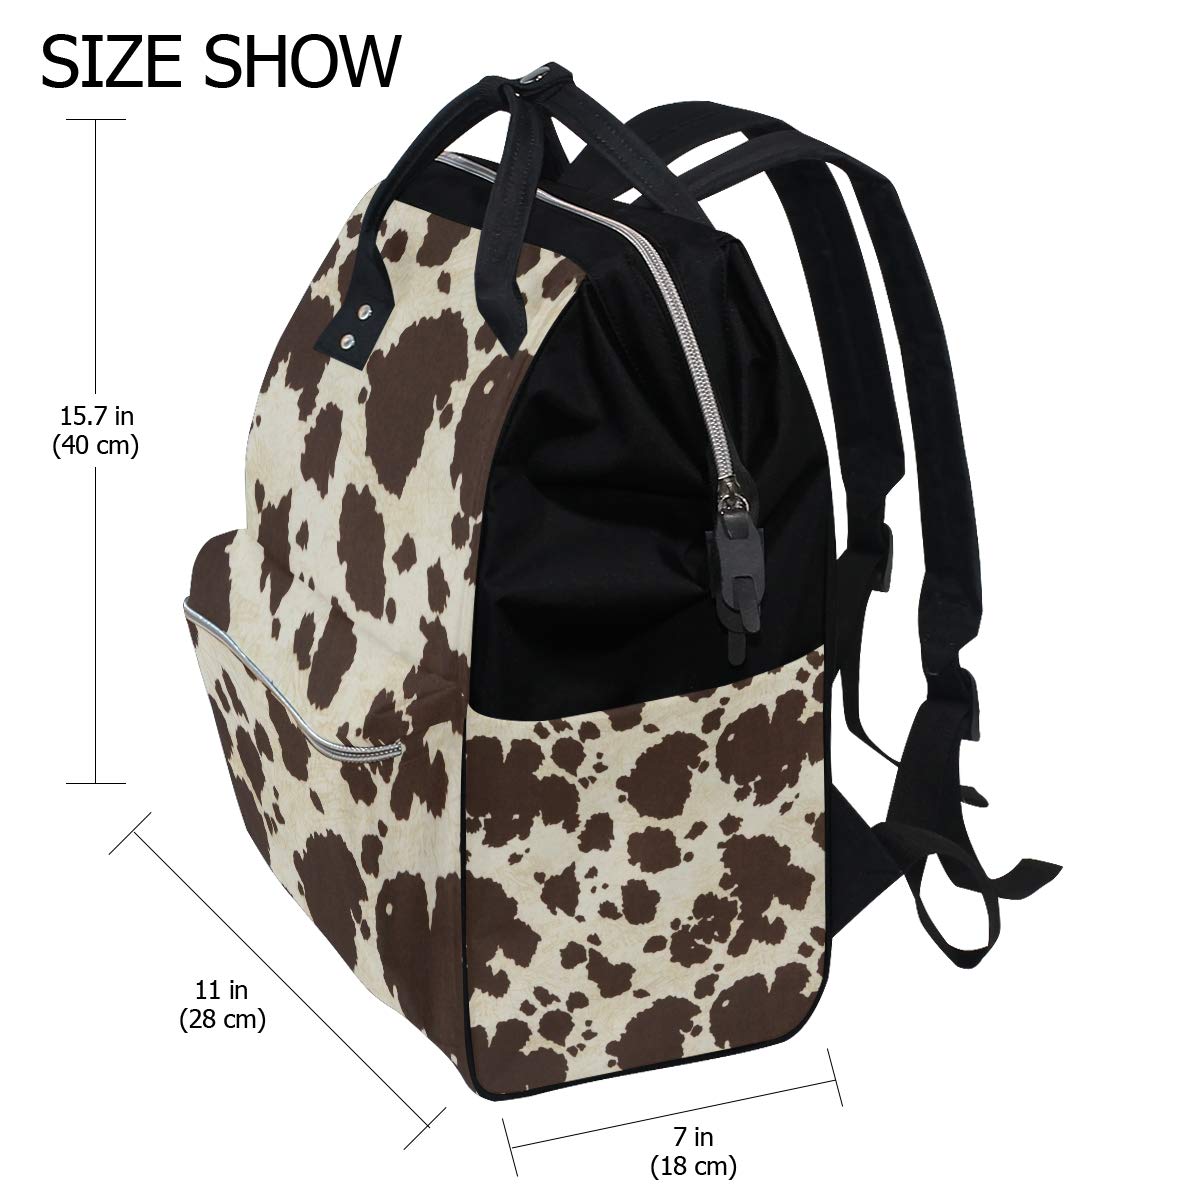 Large Capacity Diaper Tote Nappy Bag Mummy Backpack for Baby Care,Big Cow Fur Print Stylish Multi-Function Waterproof Travel Back Pack Stylish for Mom and Dad